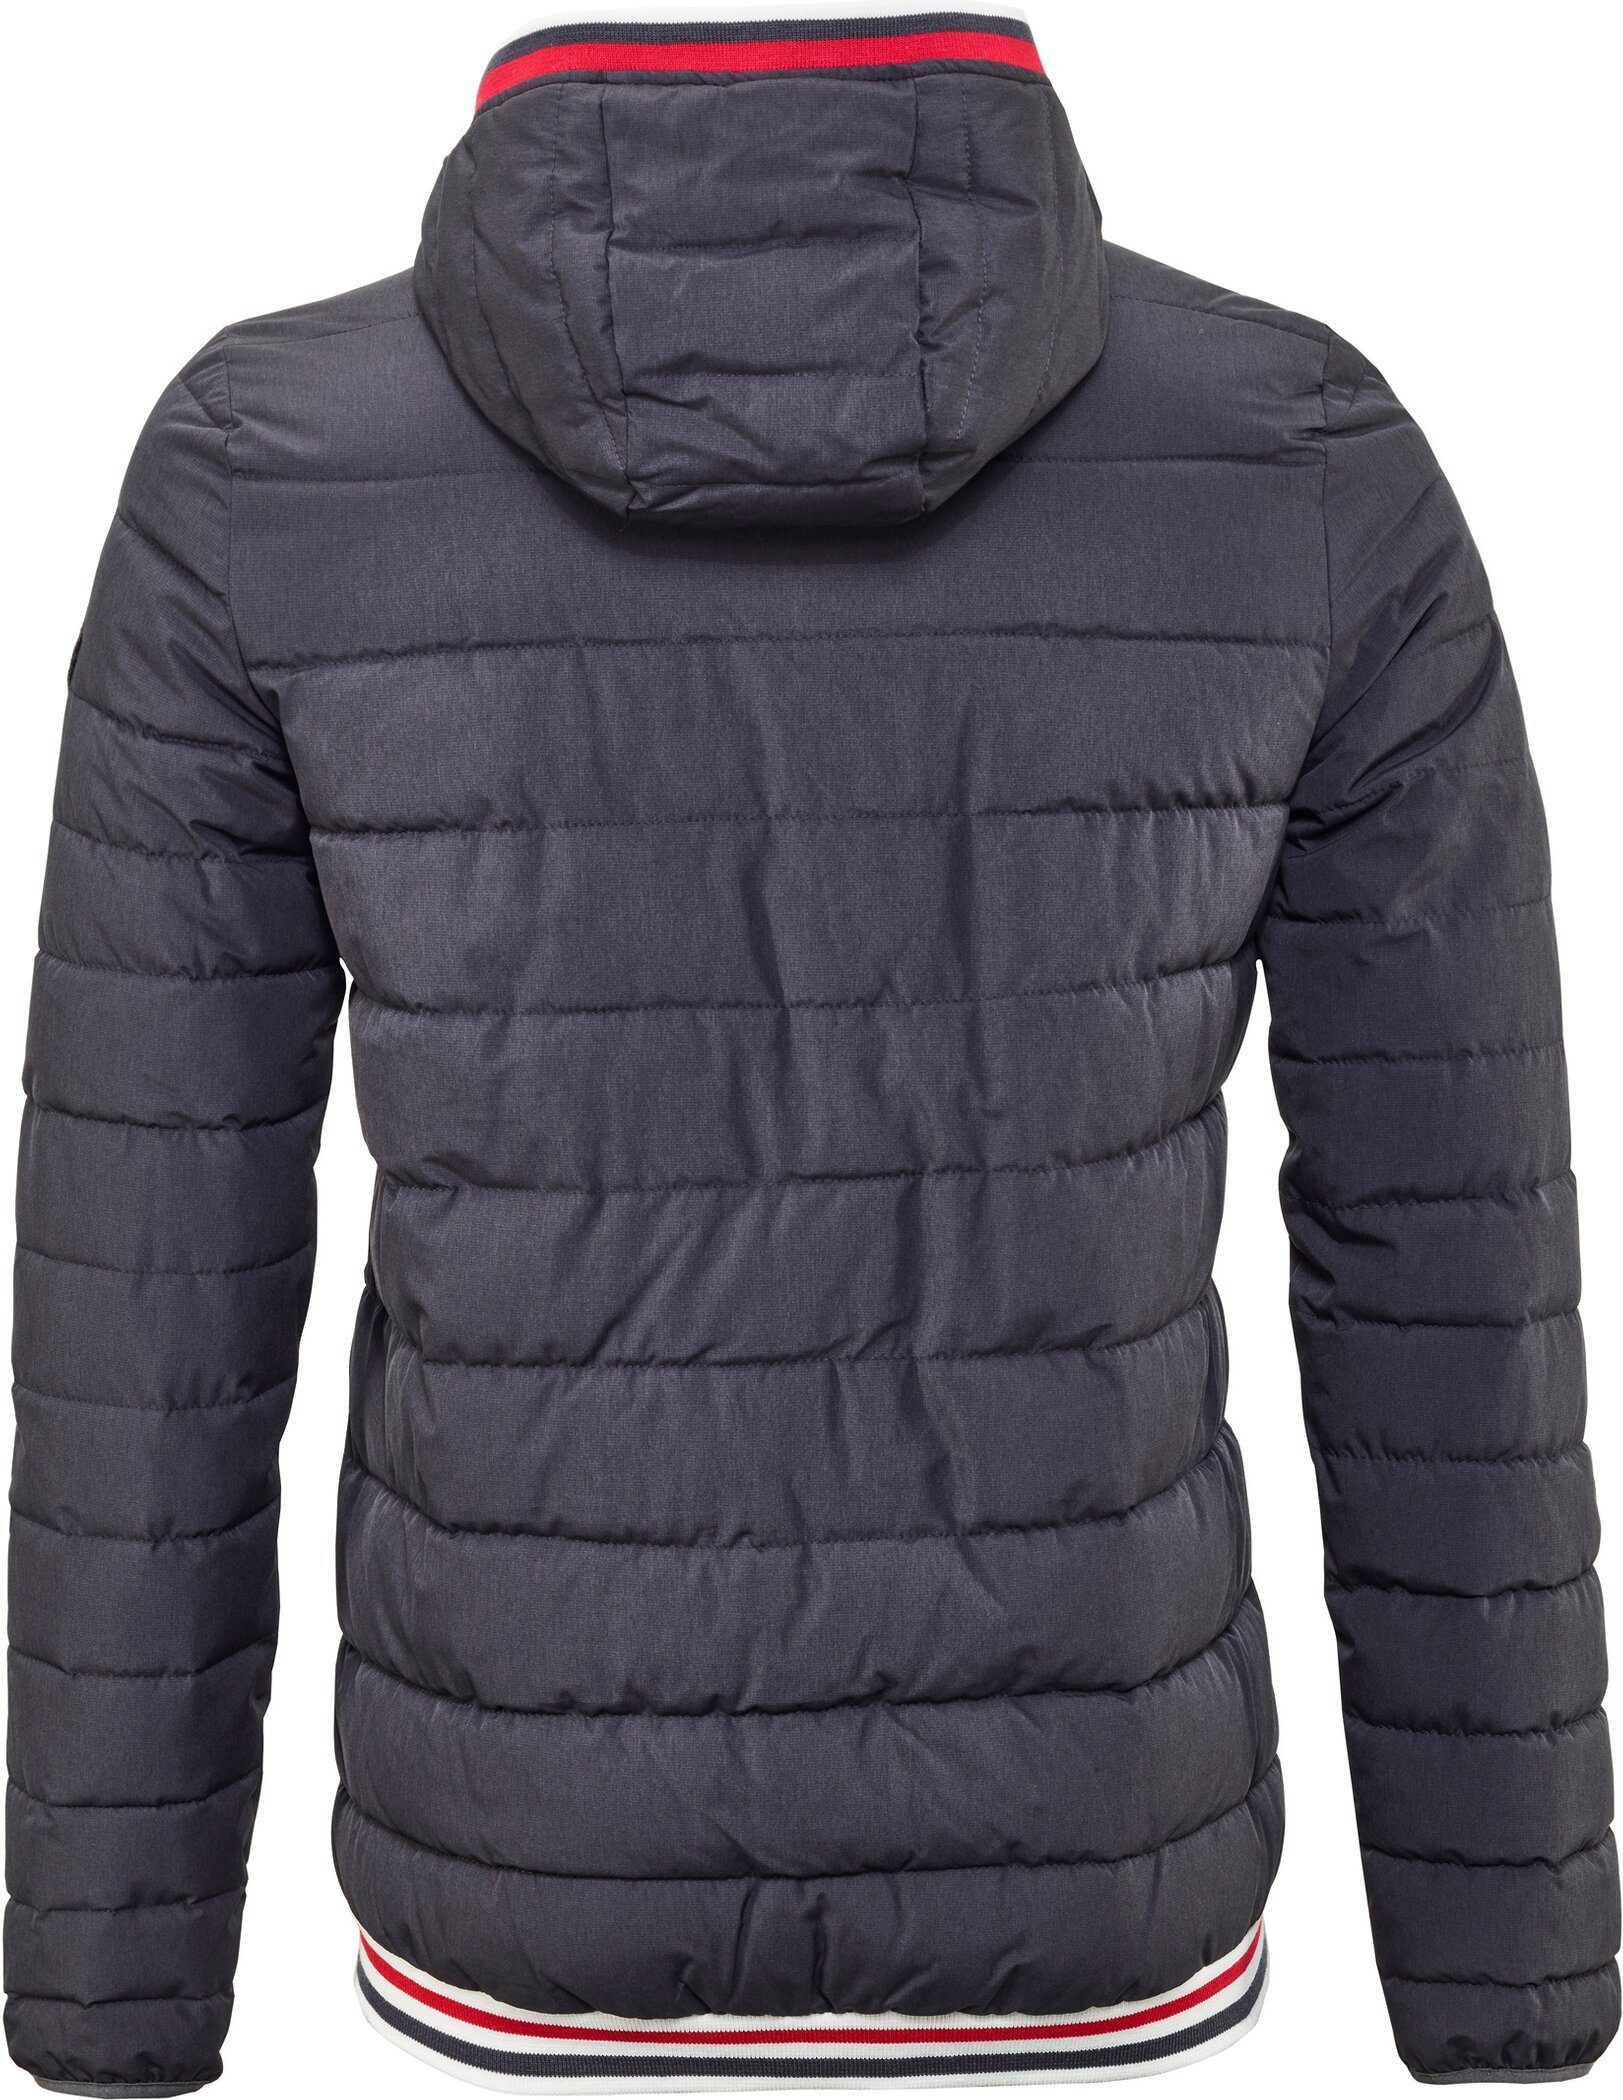 A DUNKELNAVY G.I.G.A. Quilted BLSN DX Ventoso MN Winterjacke